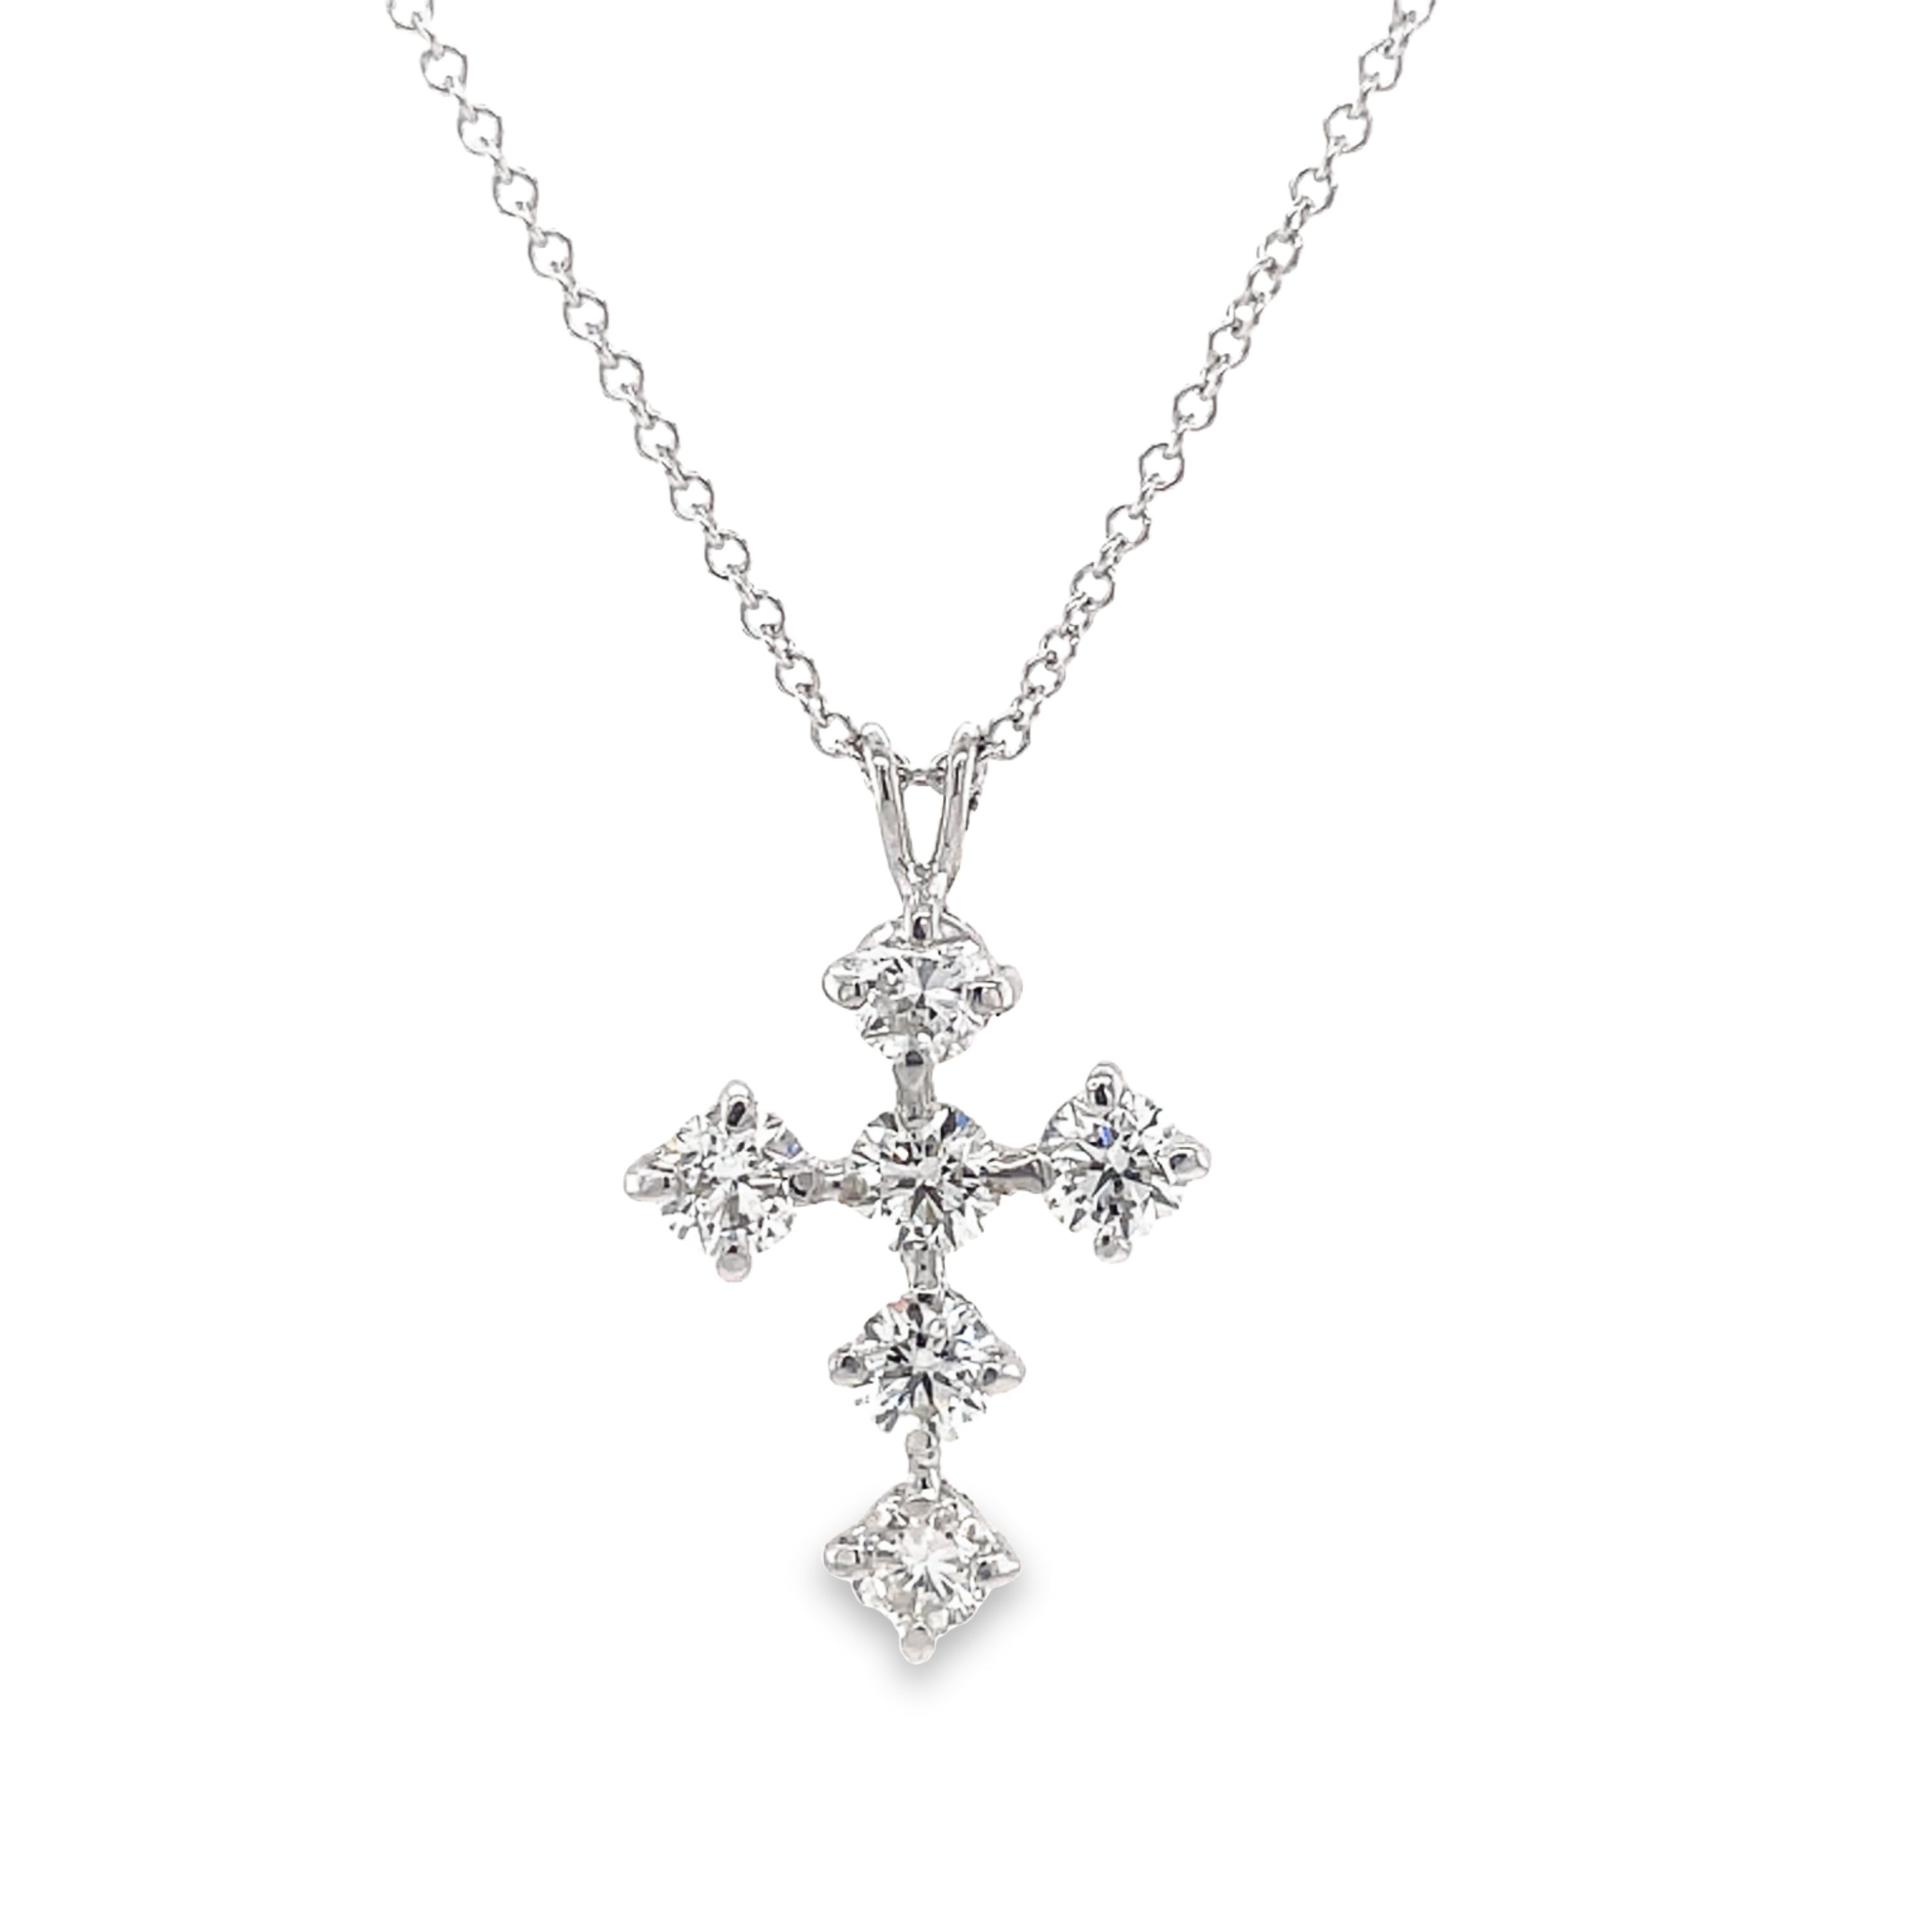 This stunning Classic Share Prong Diamond Cross Pendant Necklace is a timeless piece. Crafted from 18k white gold, it features a diamond cross with 1.00 cts of color E/F and VS1 clarity, for a beautiful sparkle. Perfect for any special occasion.  Chain is optional (18" long $325.00).